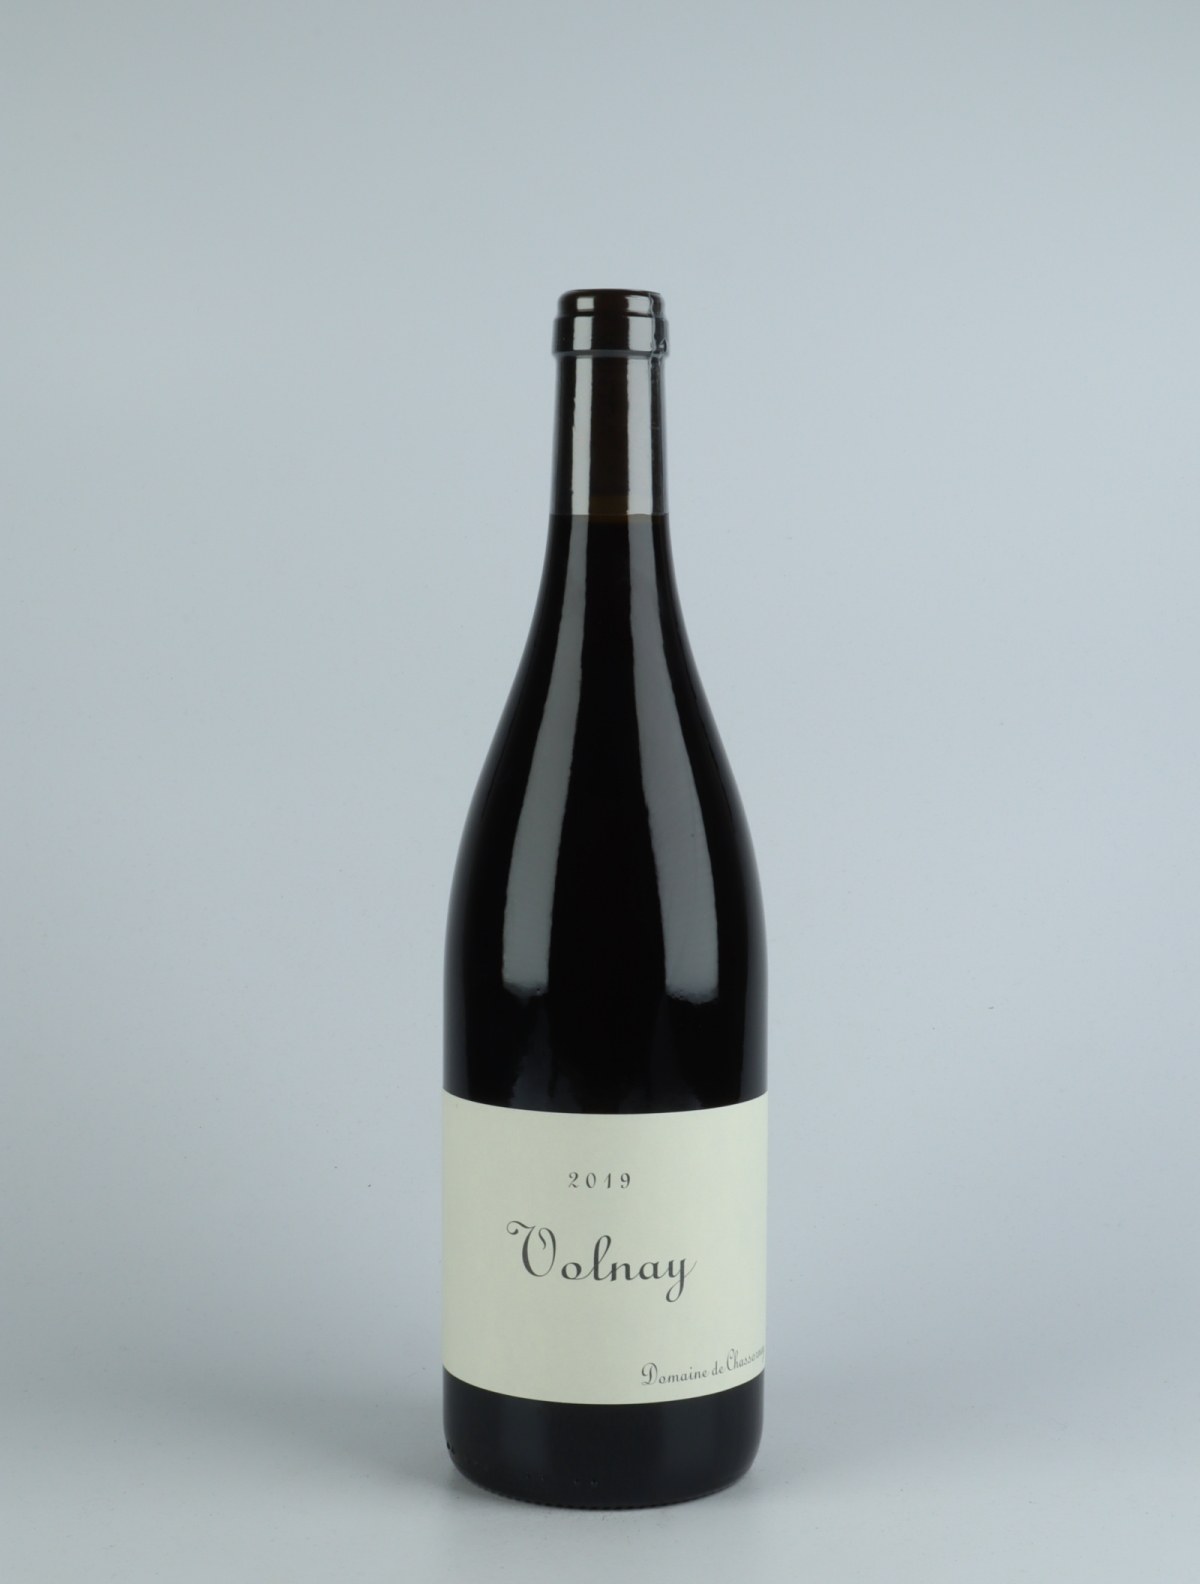 A bottle 2019 Volnay Red wine from Domaine de Chassorney, Burgundy in France